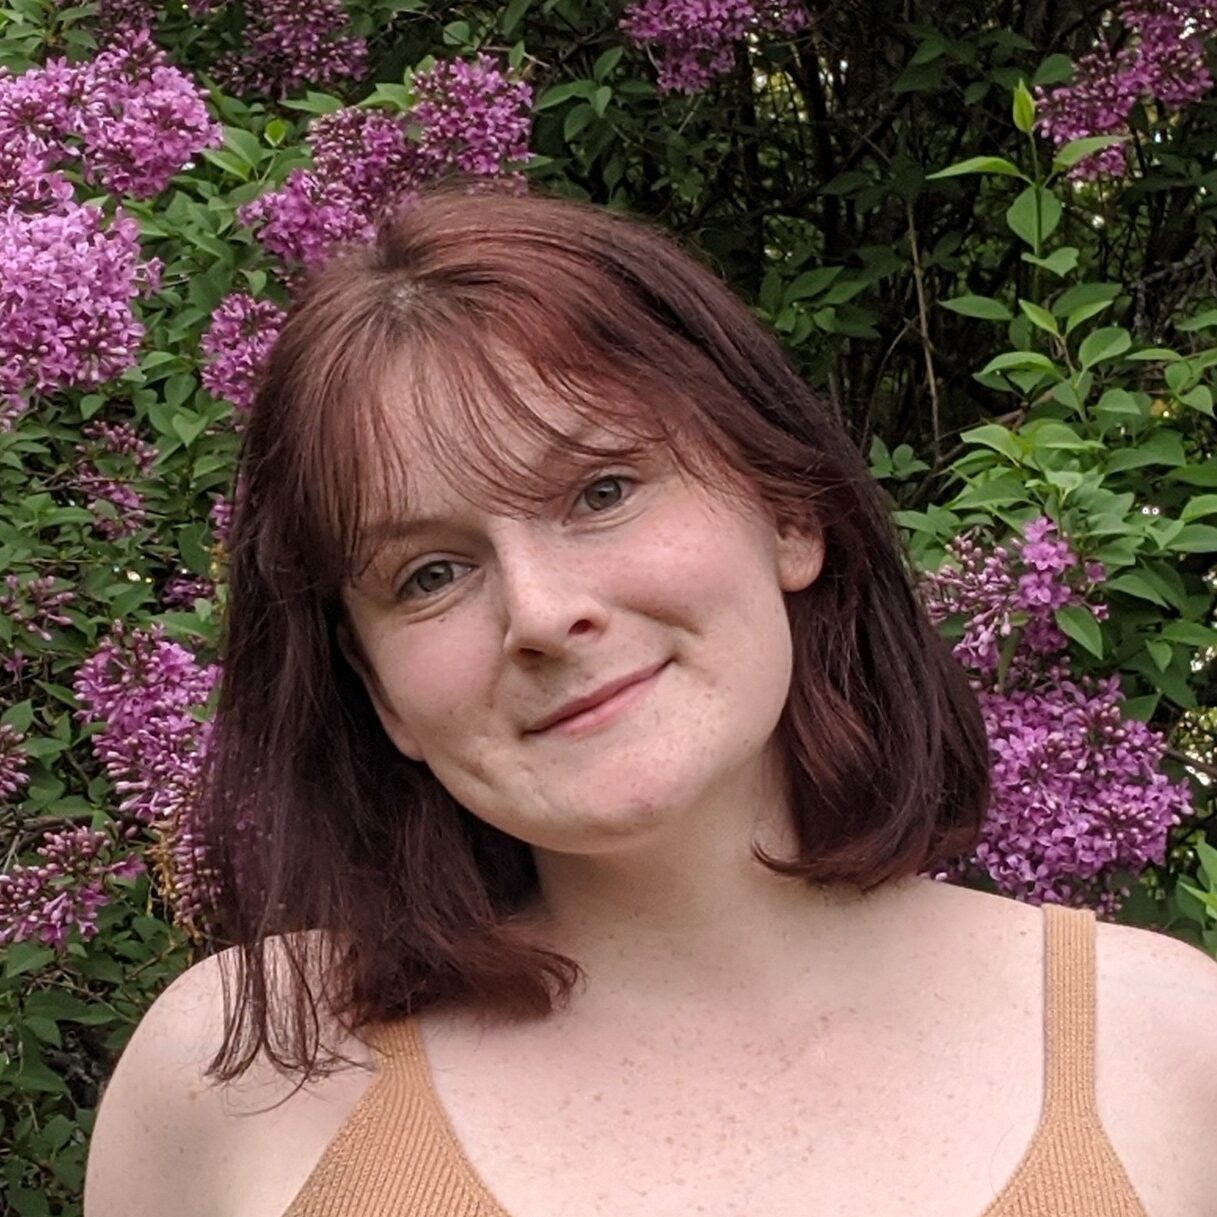 A woman wearing a yellow tank top in front of a purple lilac tree.